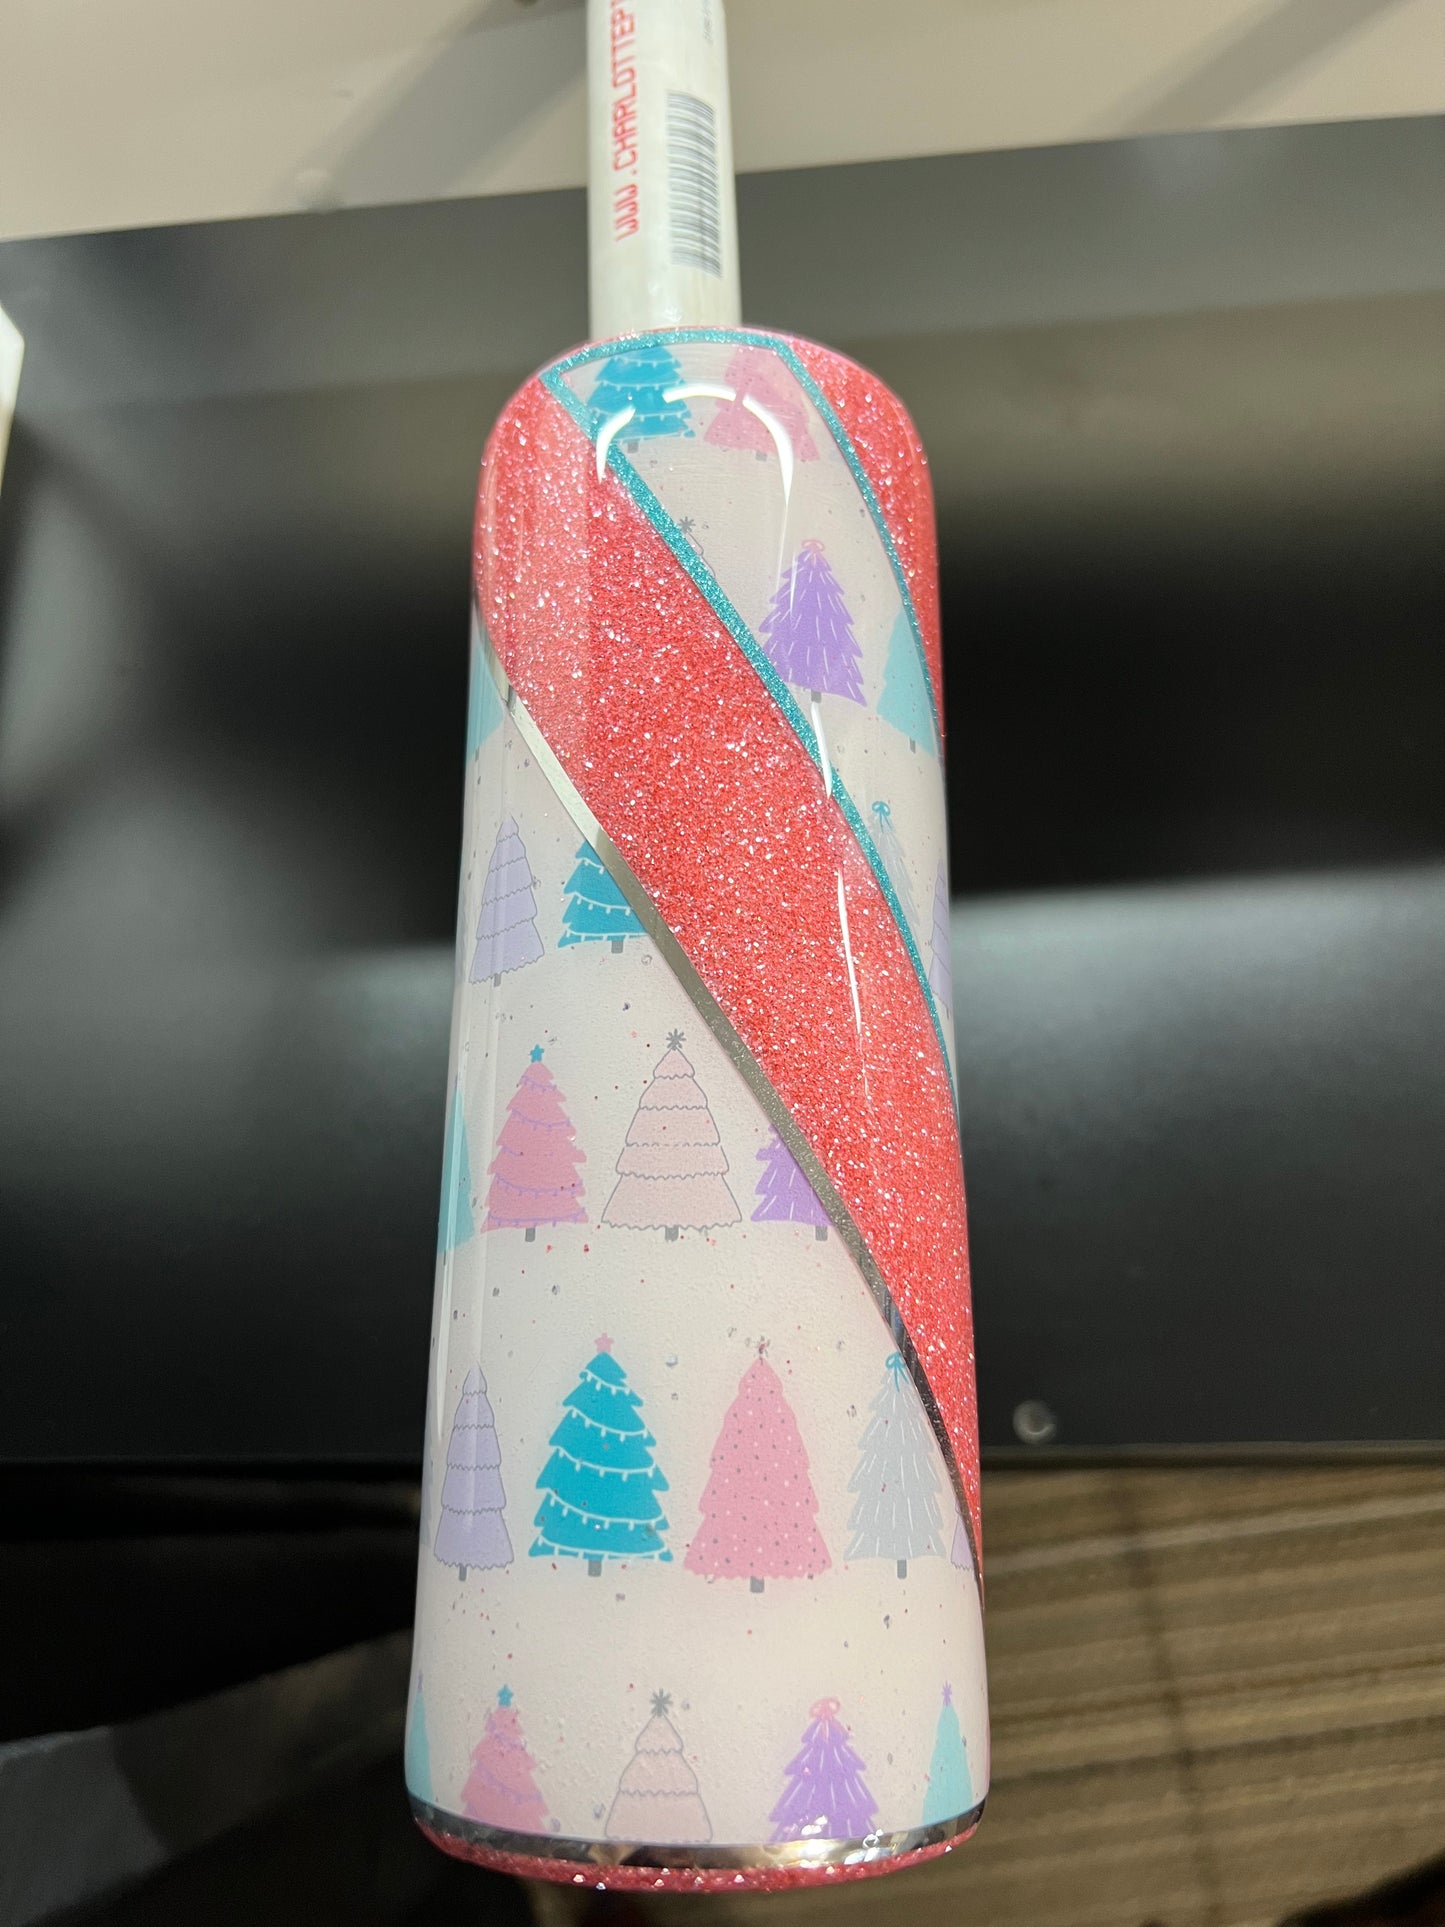 20 oz Skinny Tumbler with Sliding Lid and Straw - Pastel Christmas Tree Vinyl, Pink Glitter - Whitley cup